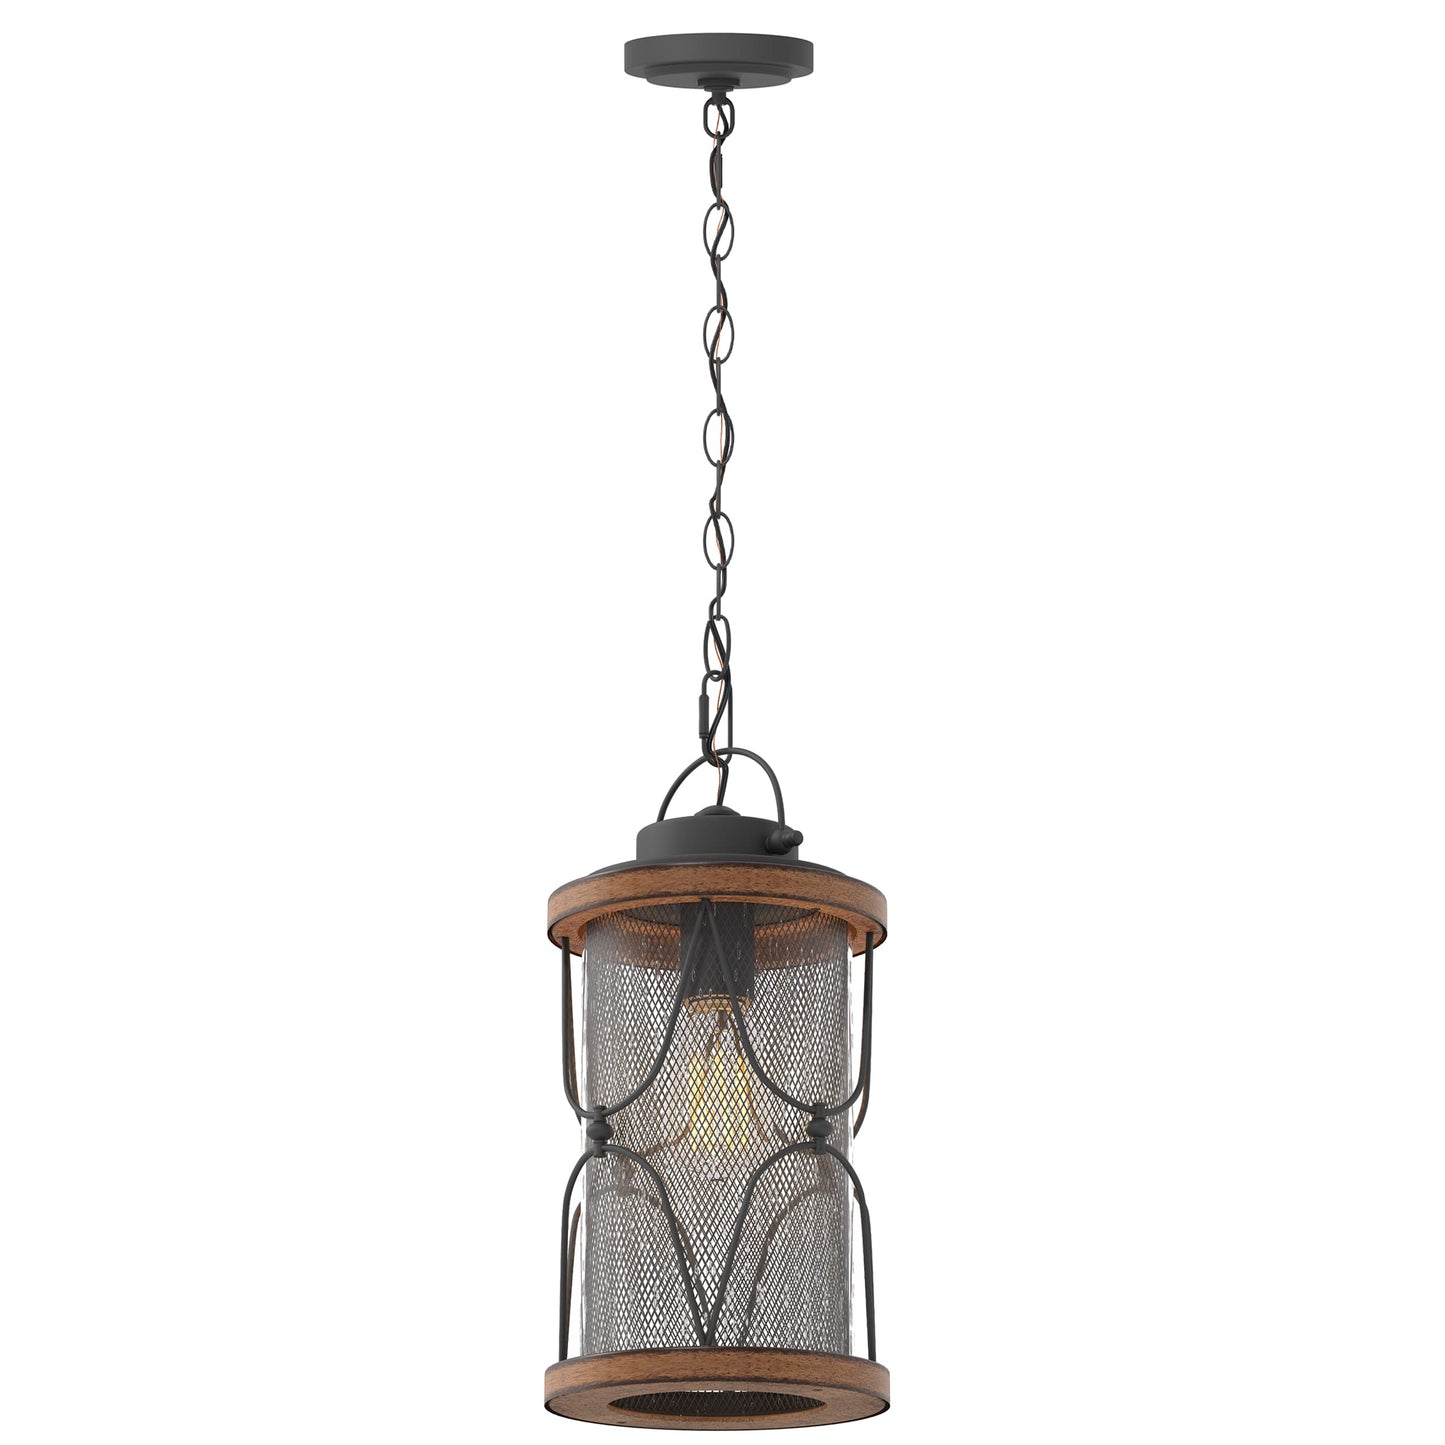 Inlight Outdoor Pendant Light for Porch, 1-Light Farmhouse Rustic Exterior Hanging Lantern, Matte Black and Barnwood Finish, Bulb Not Included, IN-0625-1-BK